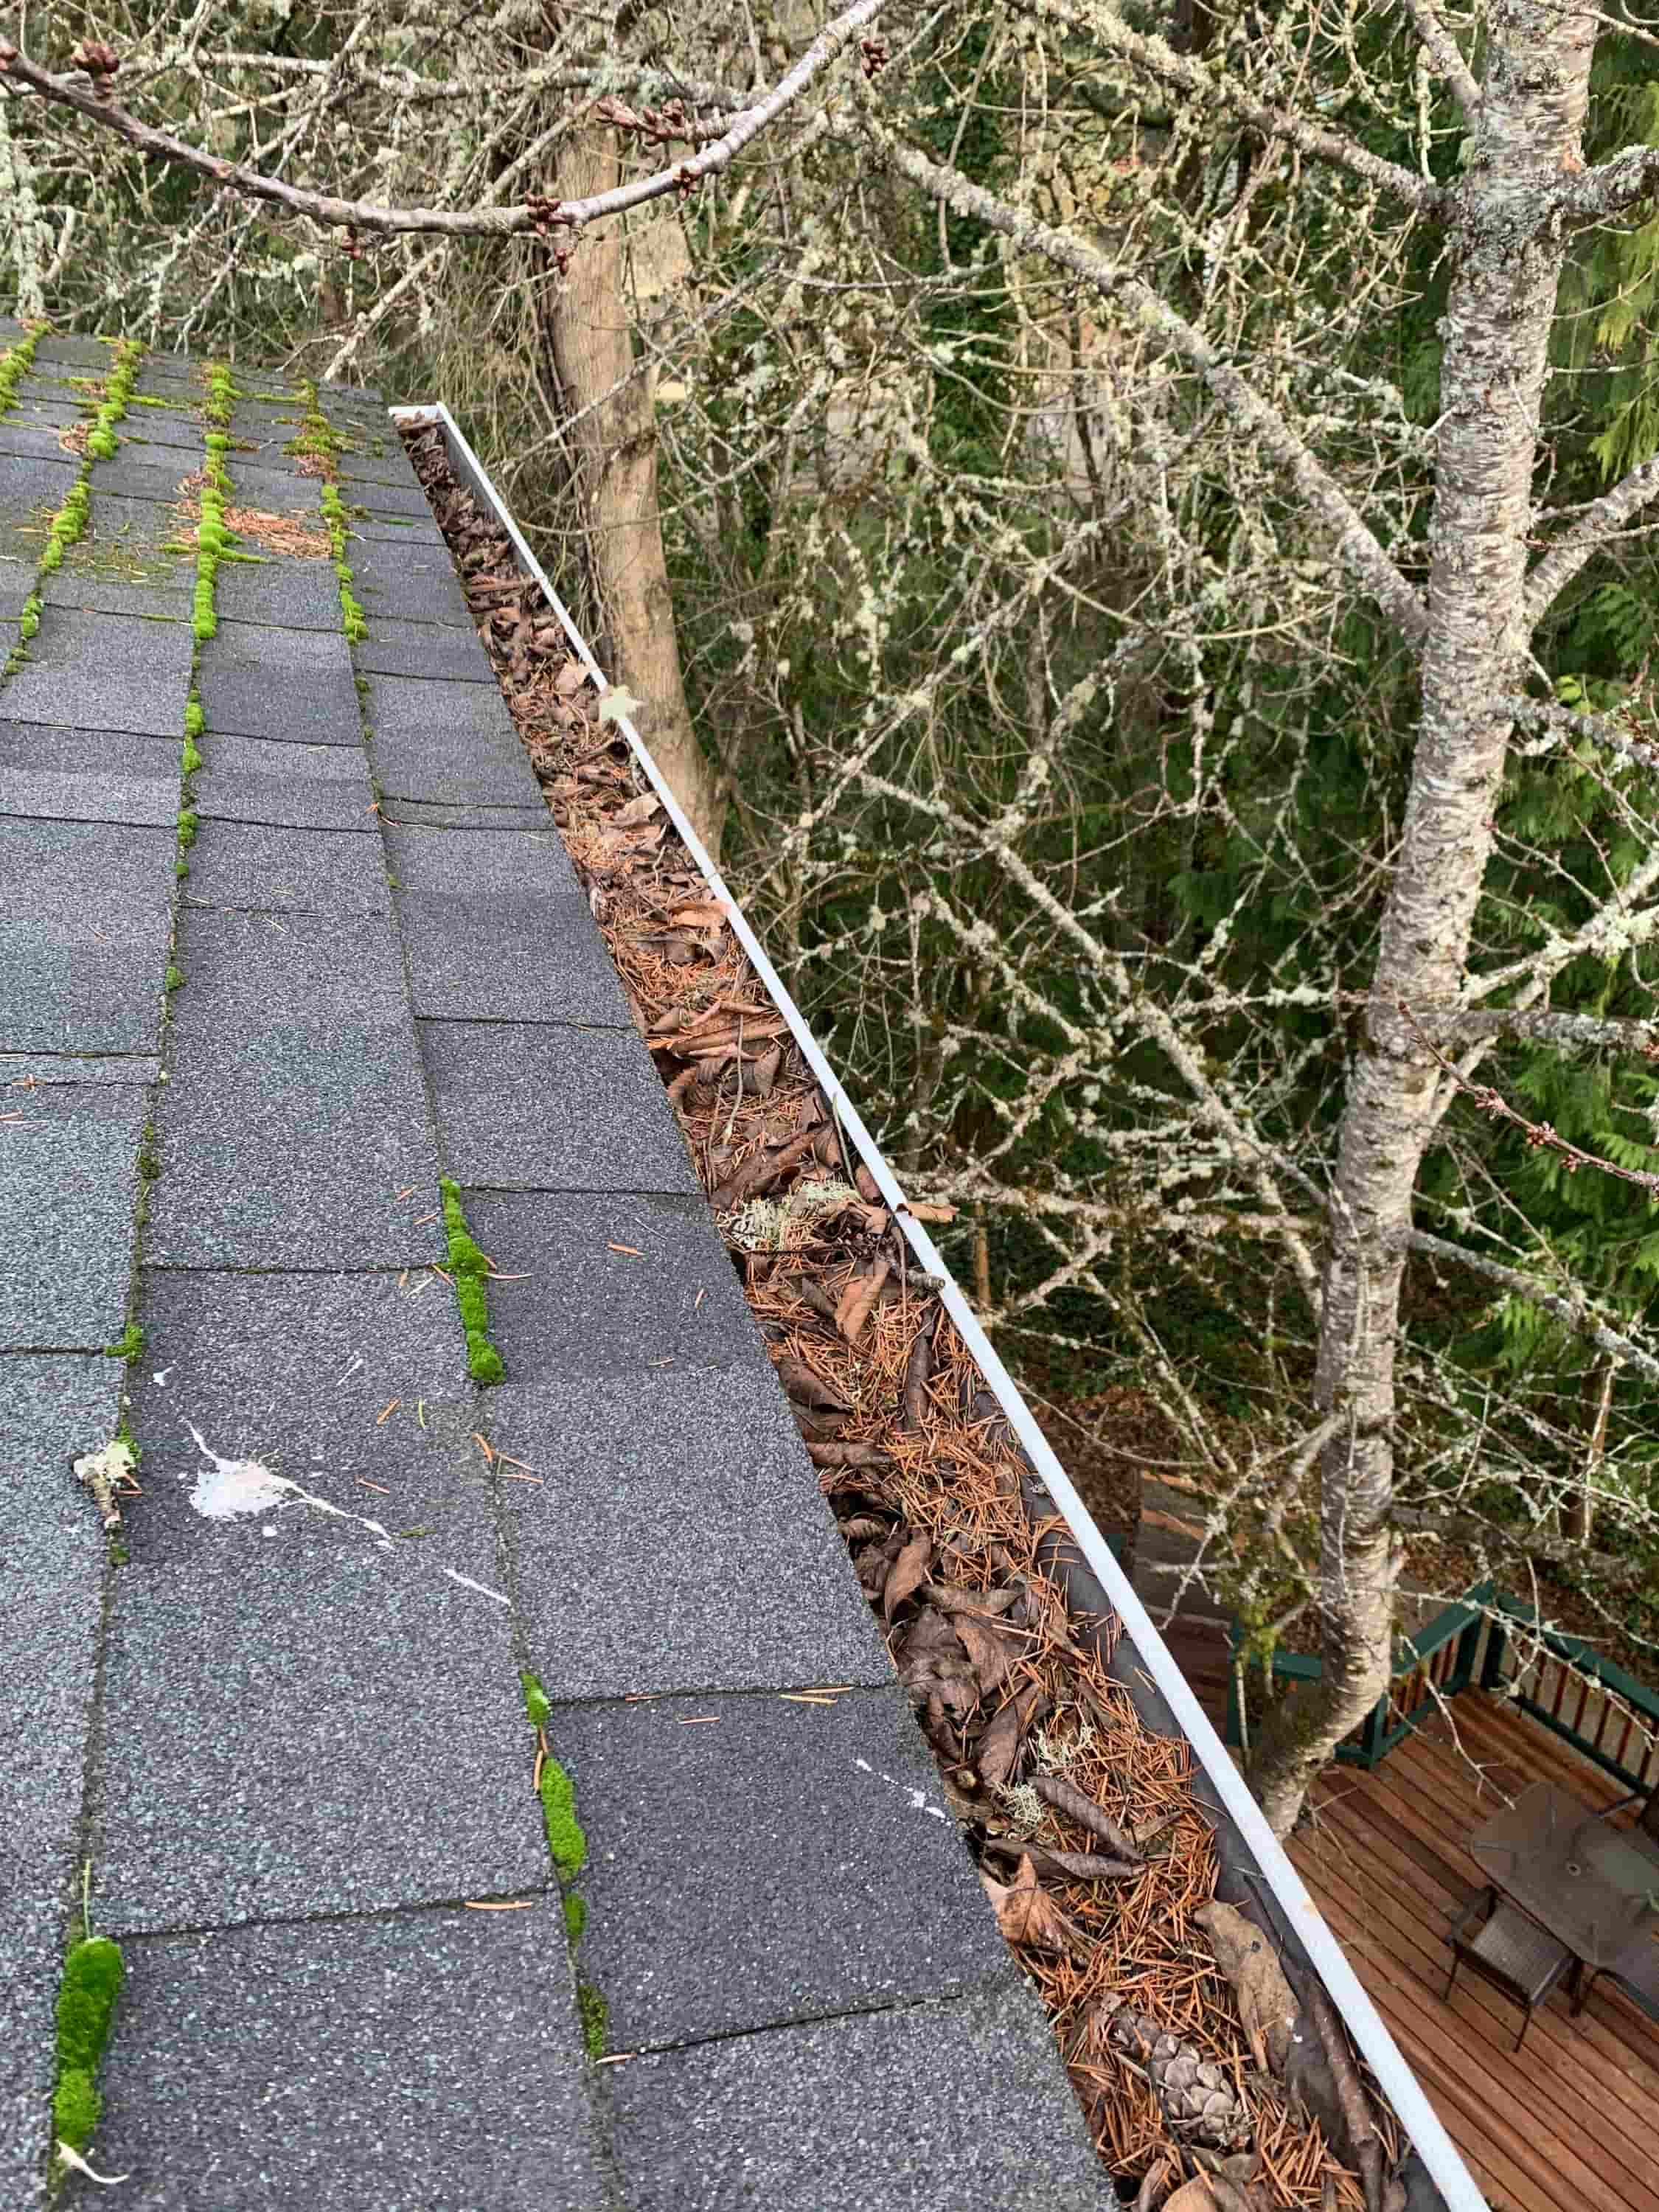 cleaning downspouts